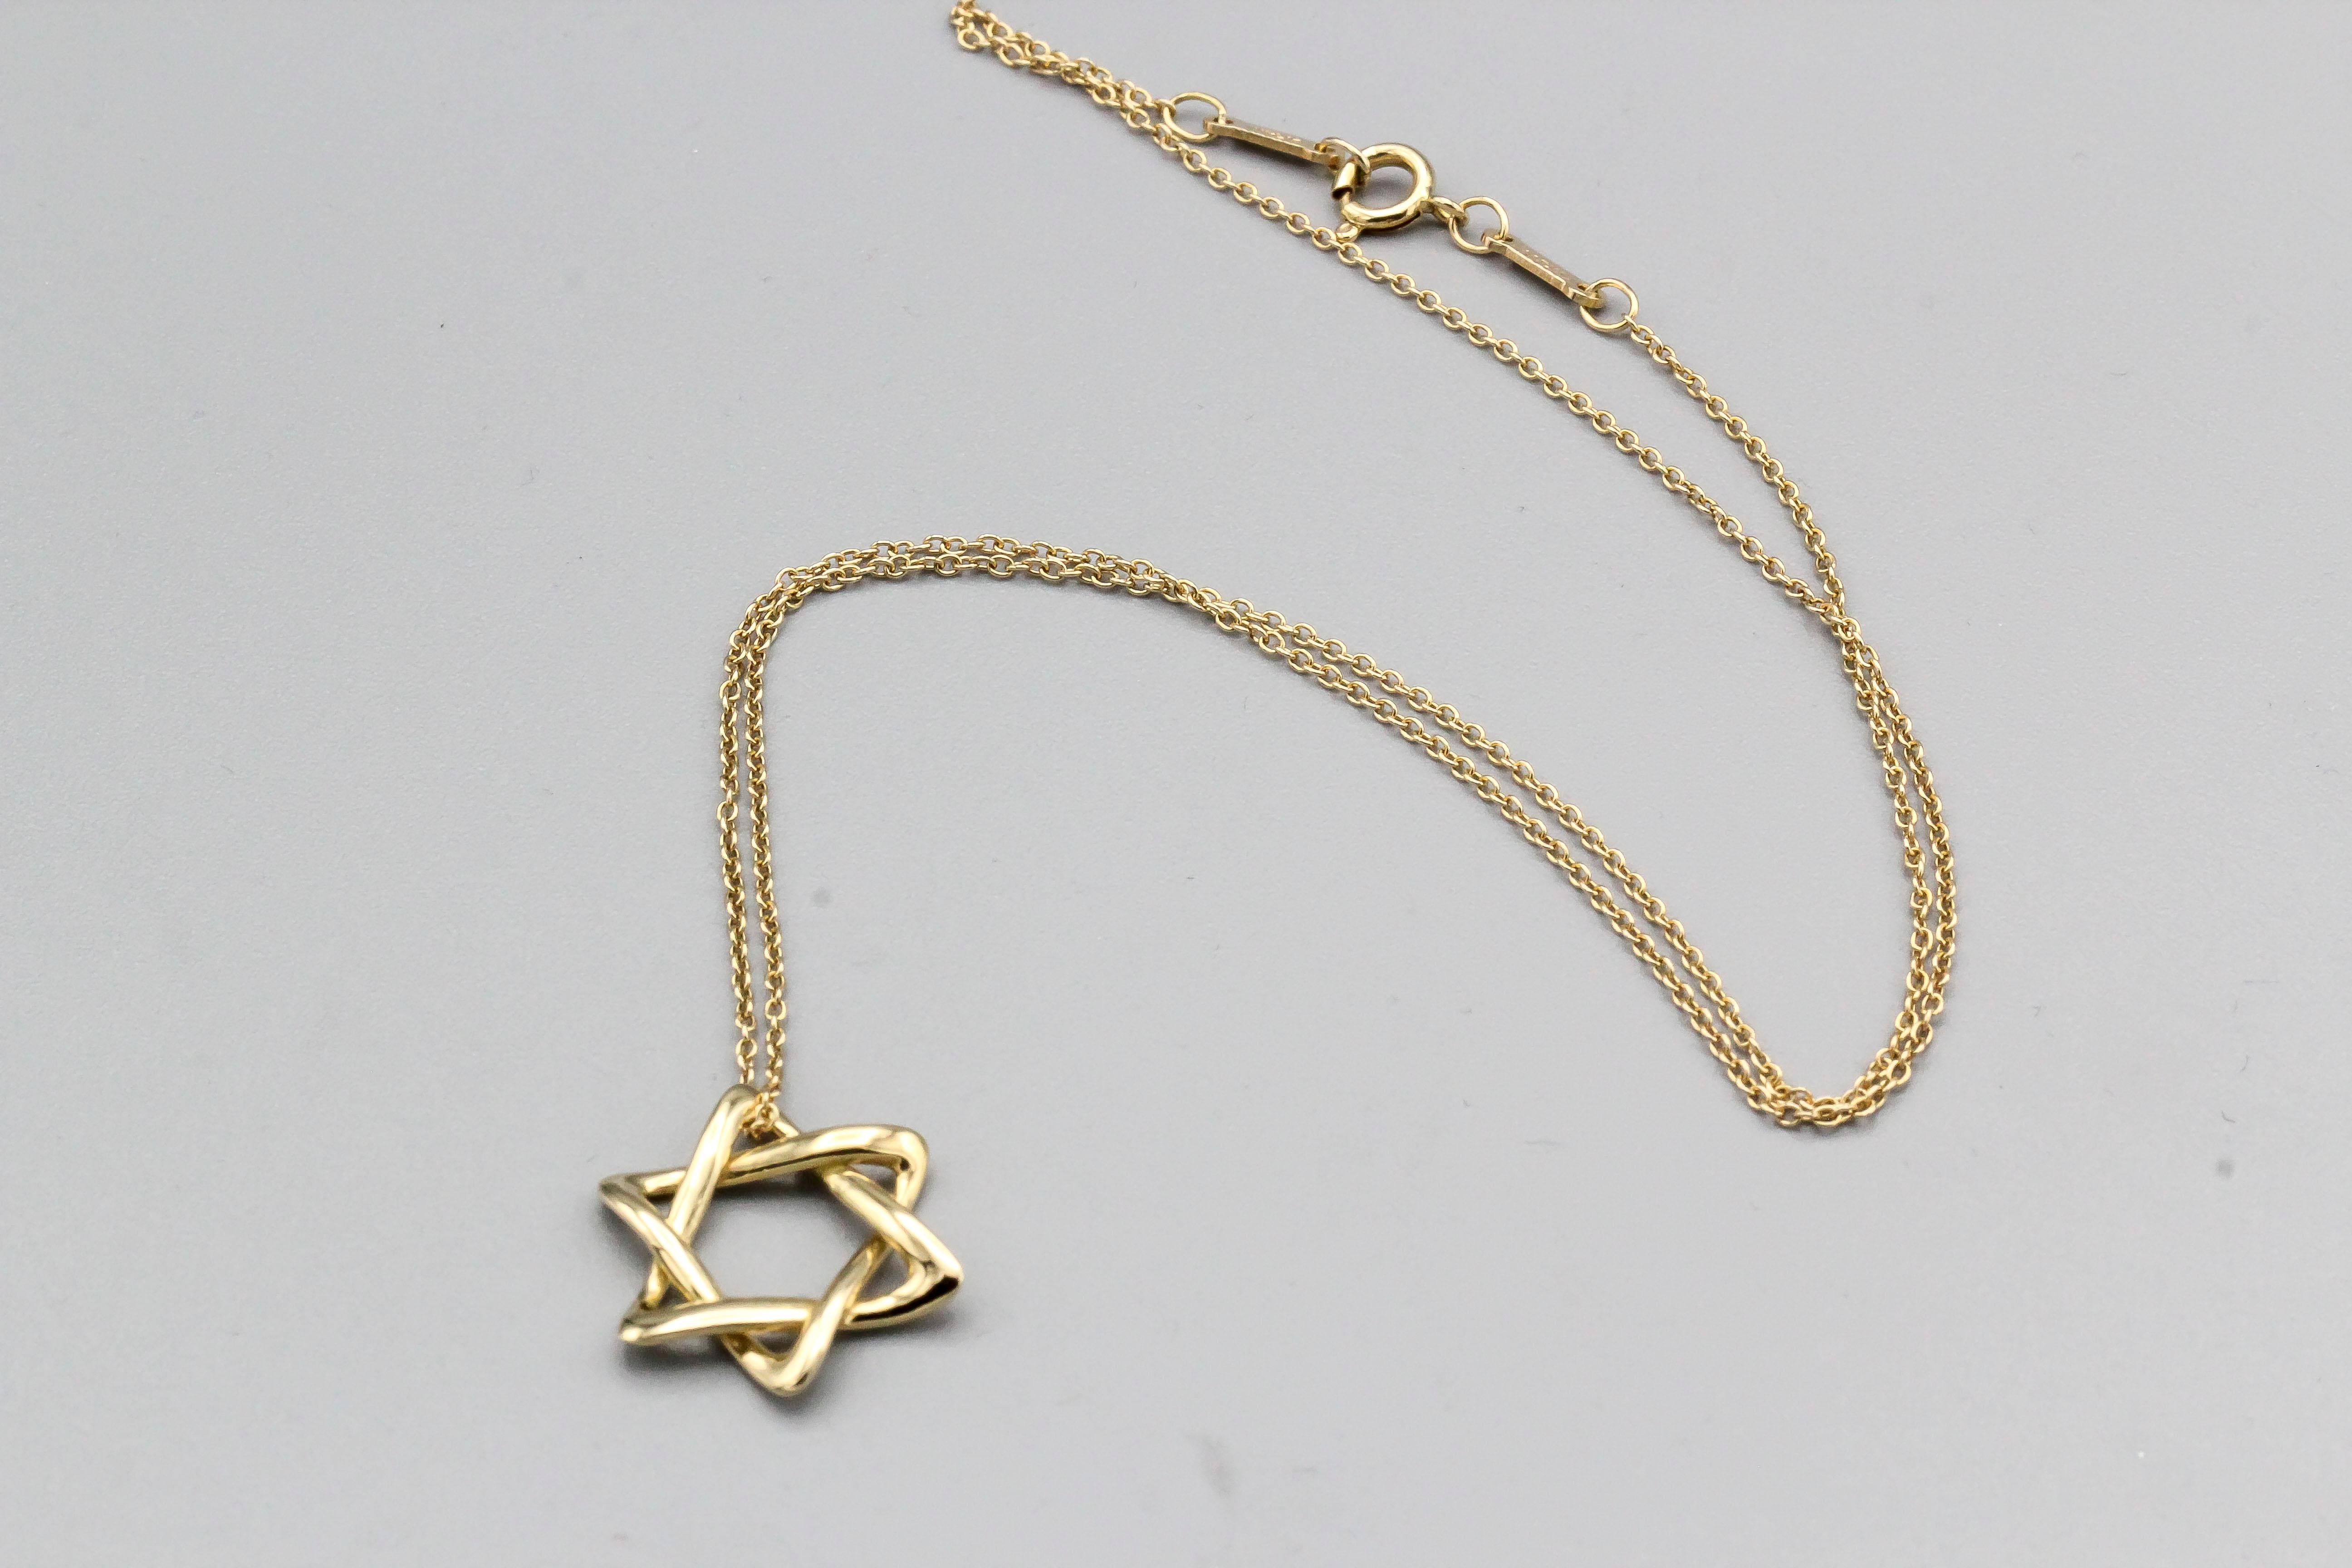 Elegant 18K yellow gold David's Star necklace by Tiffany & Co., Elsa Peretti. This is the larger size and retails for $1100.

Hallmarks: Tiffany & Co., Peretti, 18KTS, Spain.